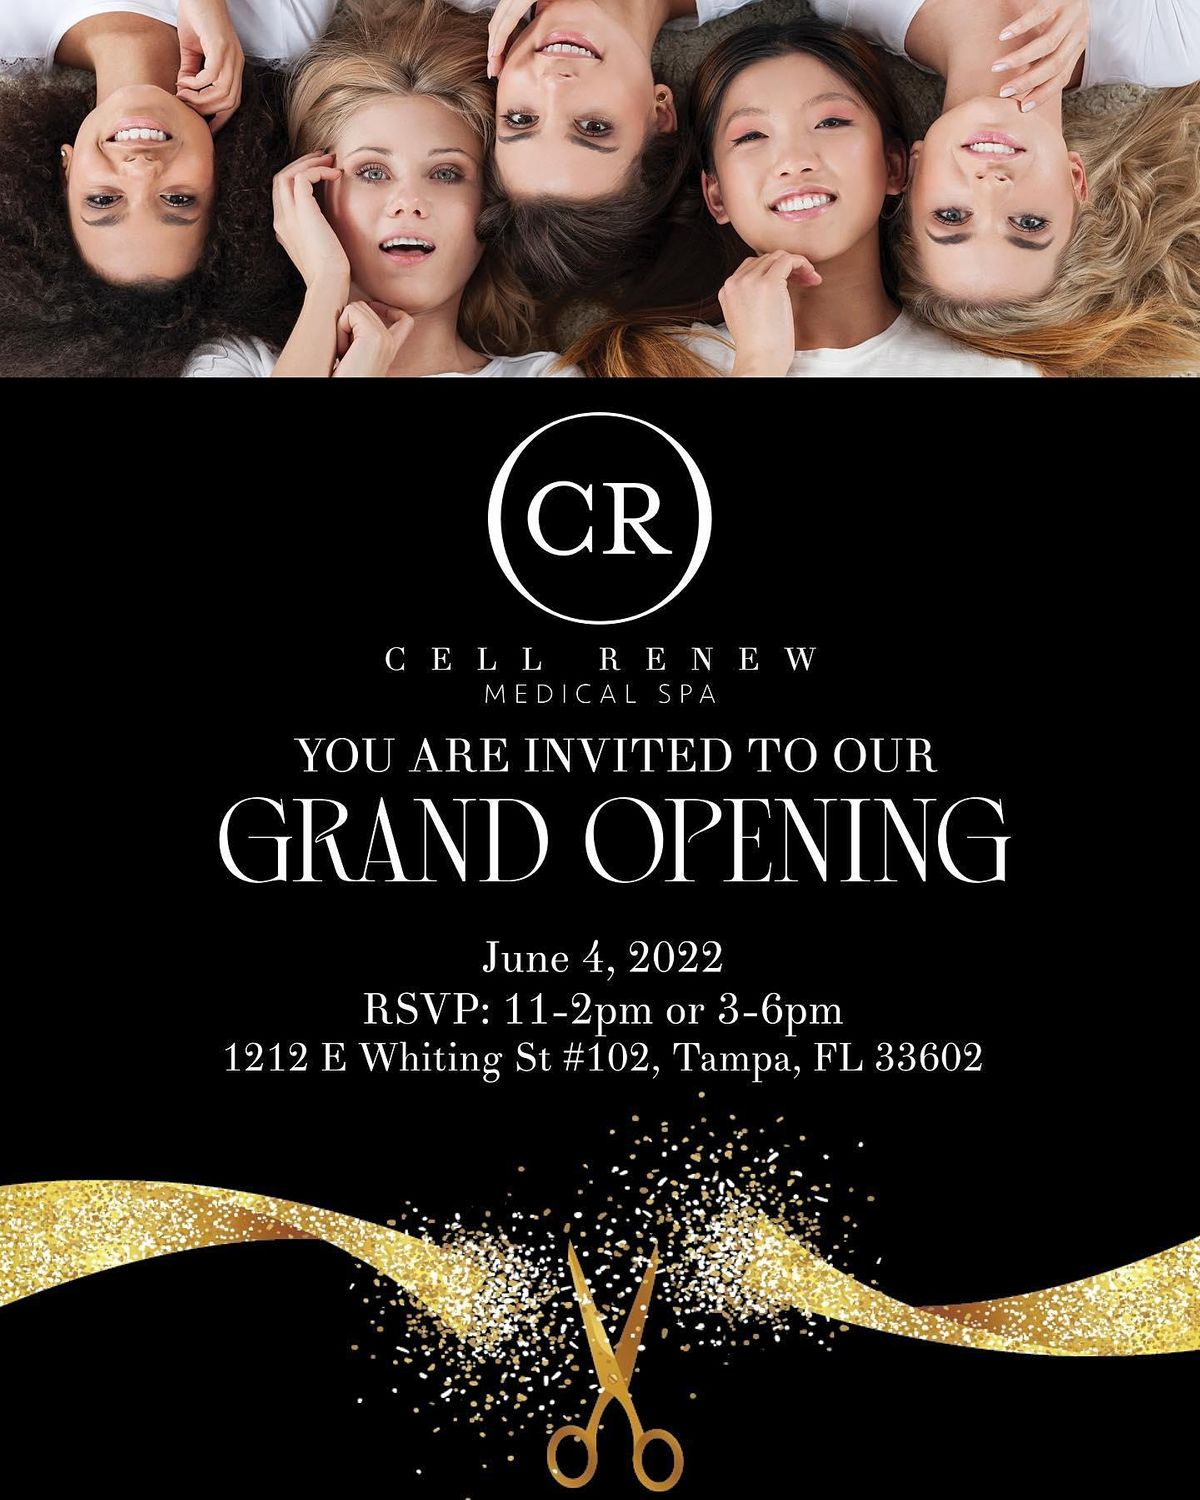 GRAND OPENING OF CELL RENEW MEDICAL SPA - CHANNELSIDE